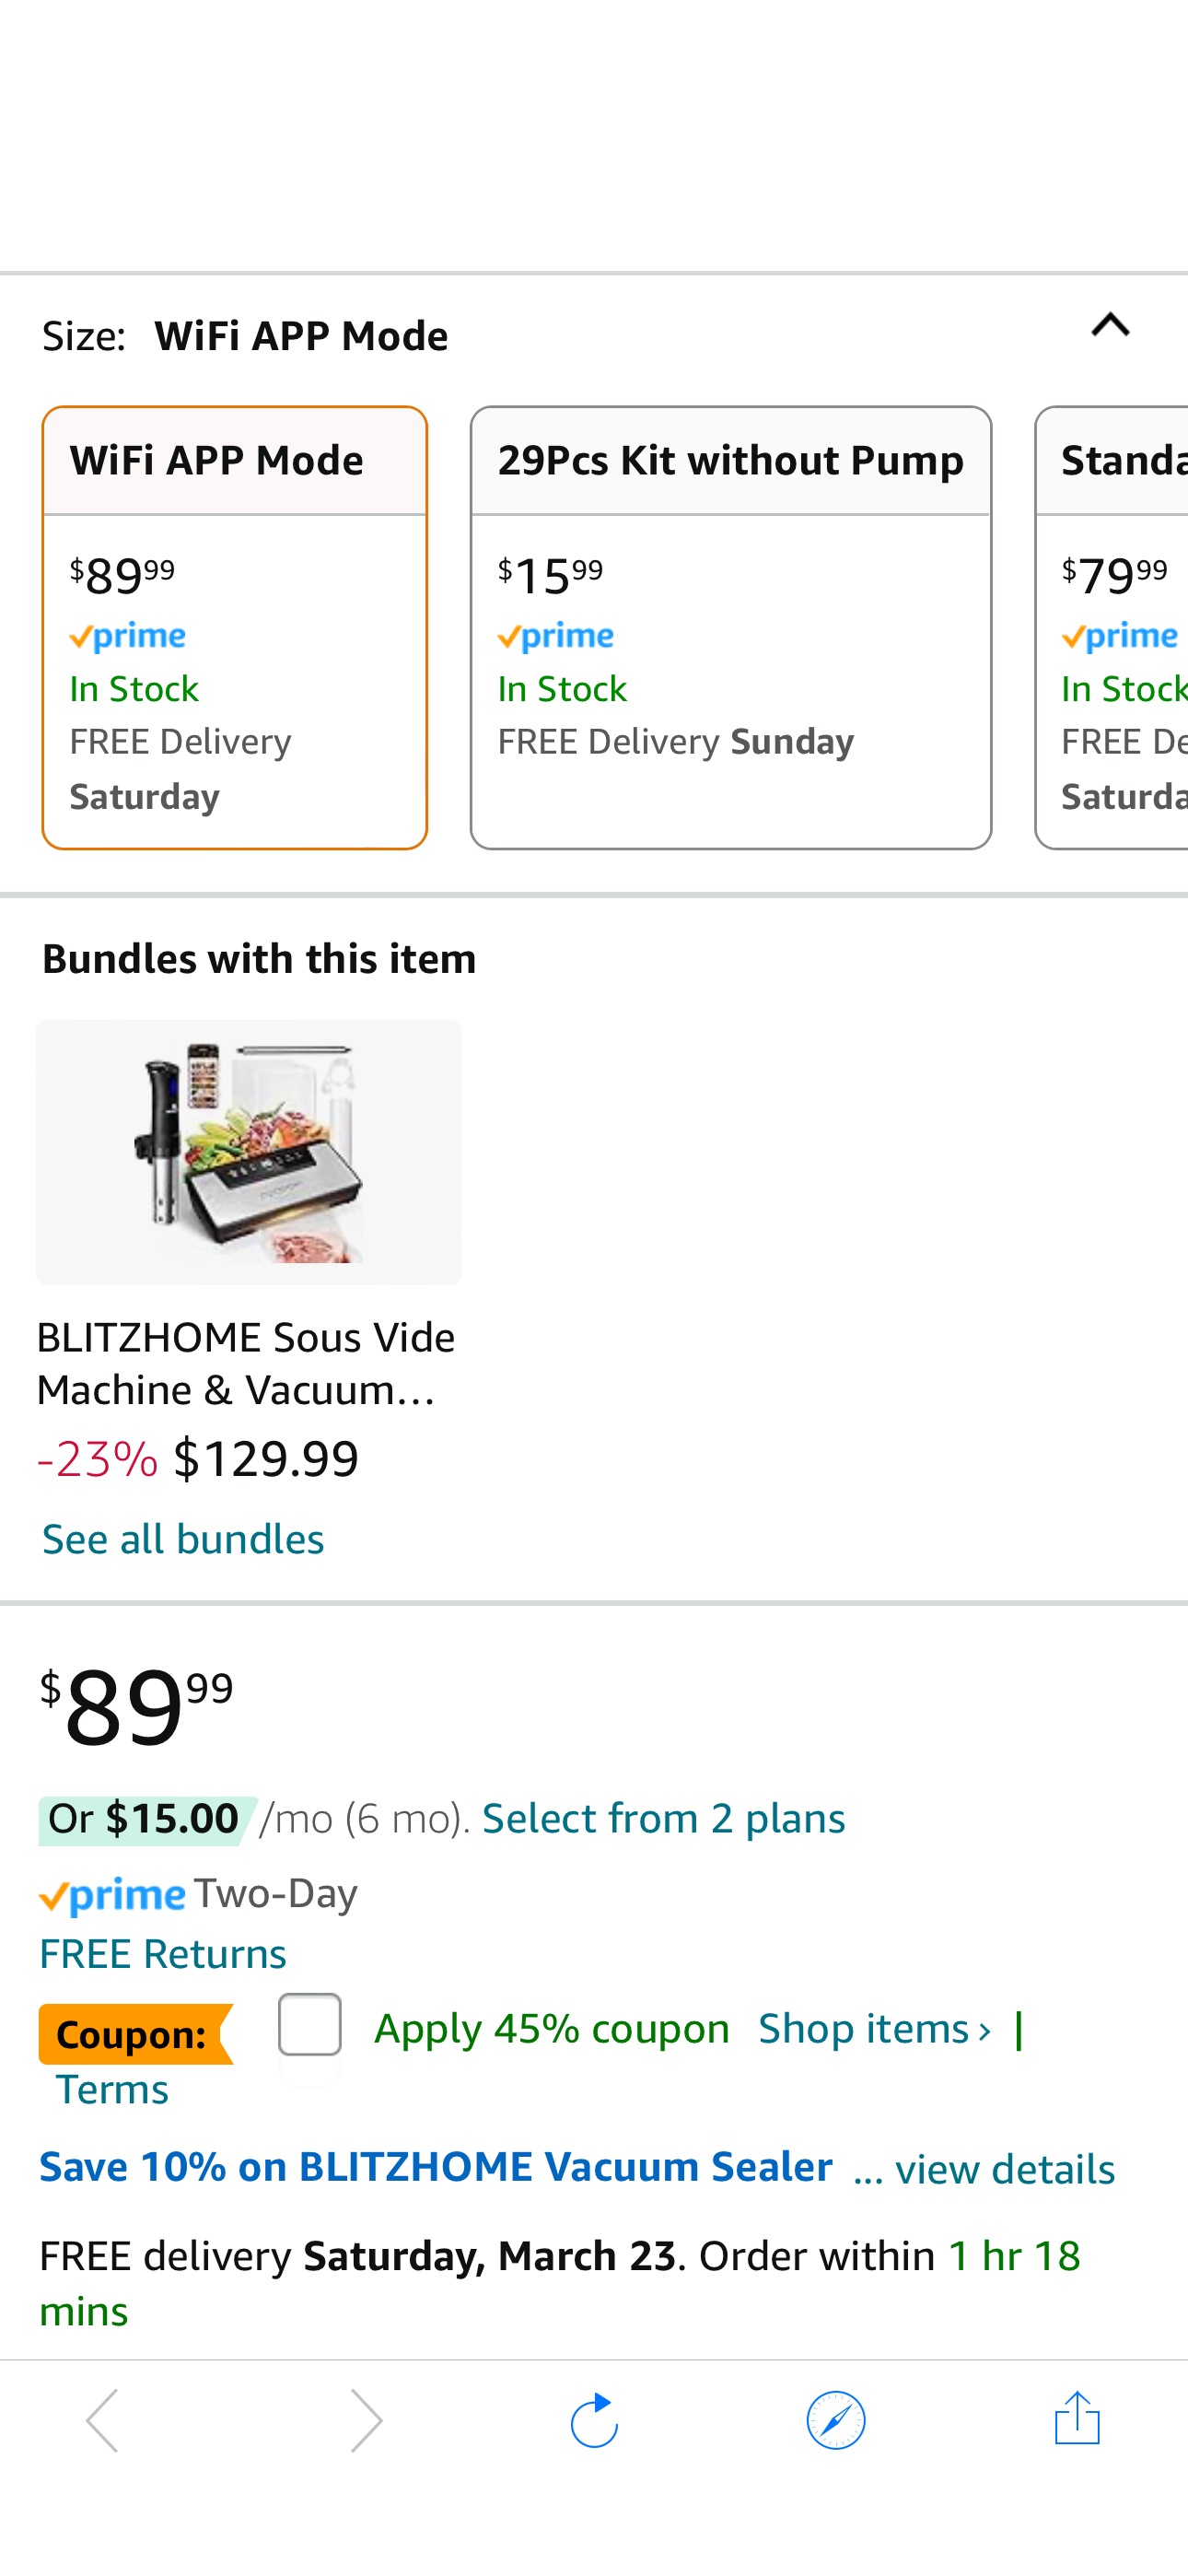 Amazon.com: BLITZHOME Sous Vide Machine, WiFi APP Included, 1100W Sous Vide Cooker with Accurate Temperature & Timer 点击coupon